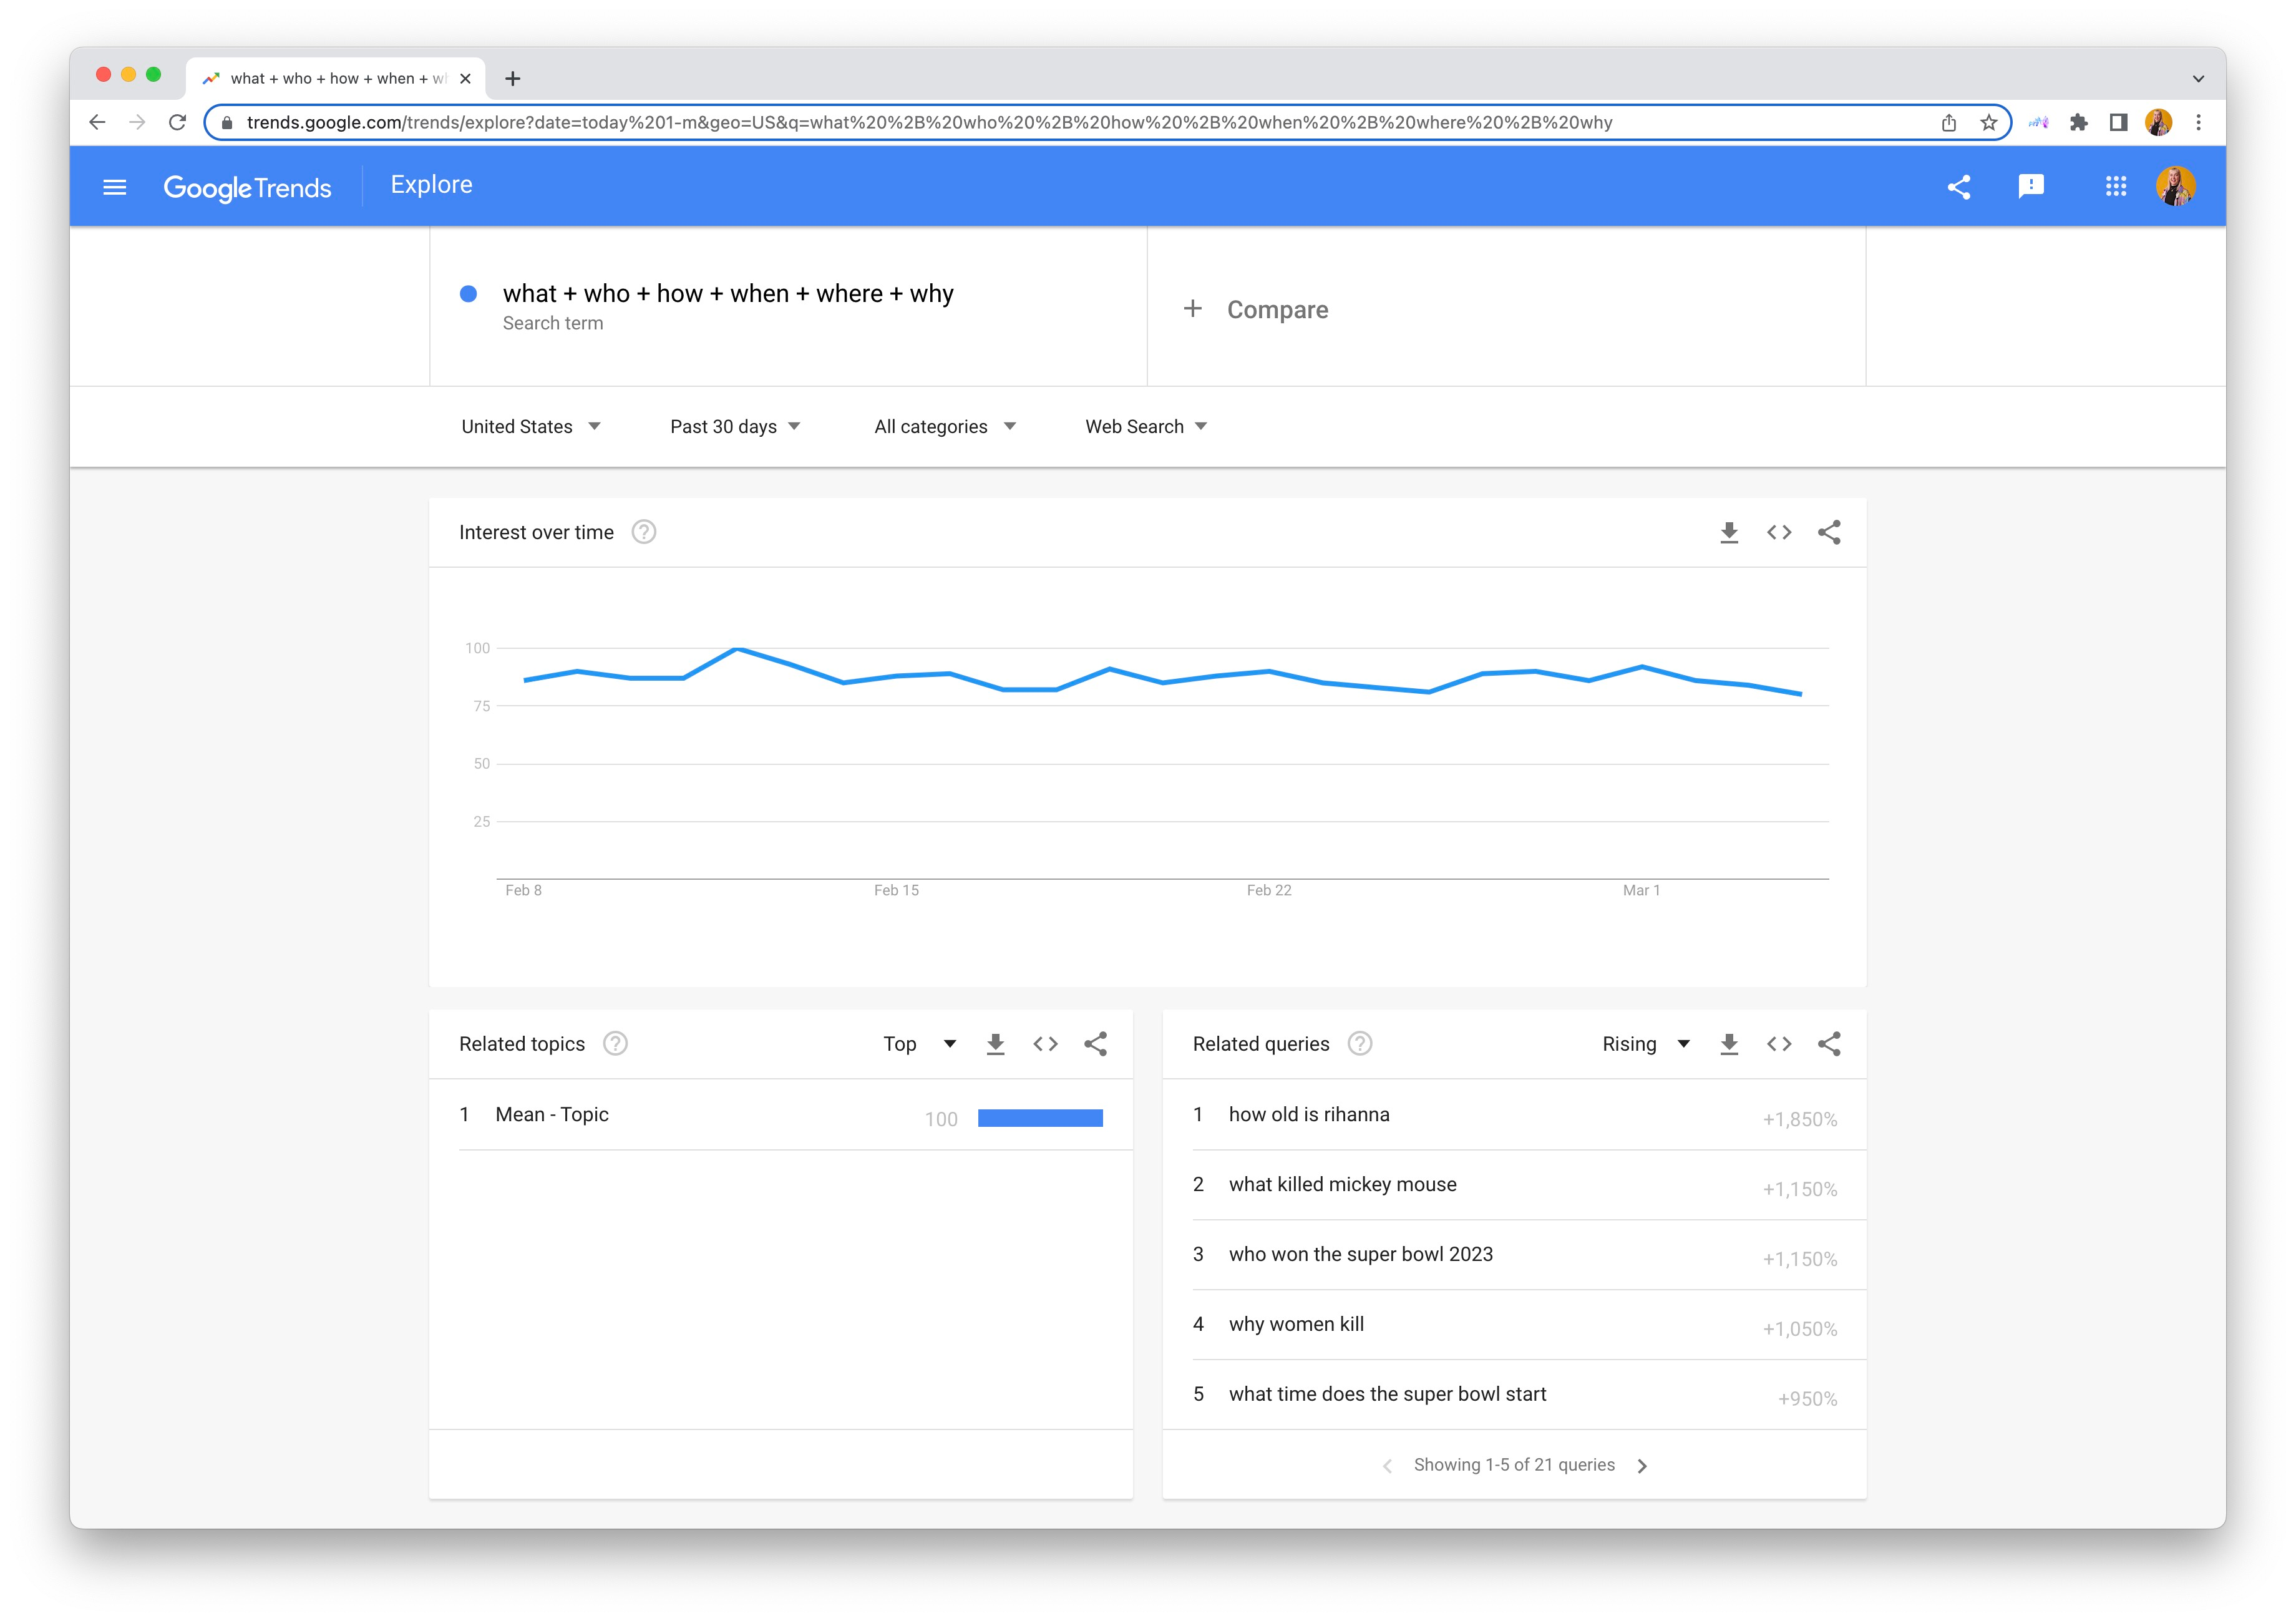 Narrow down your Google Trends search by selecting different categories